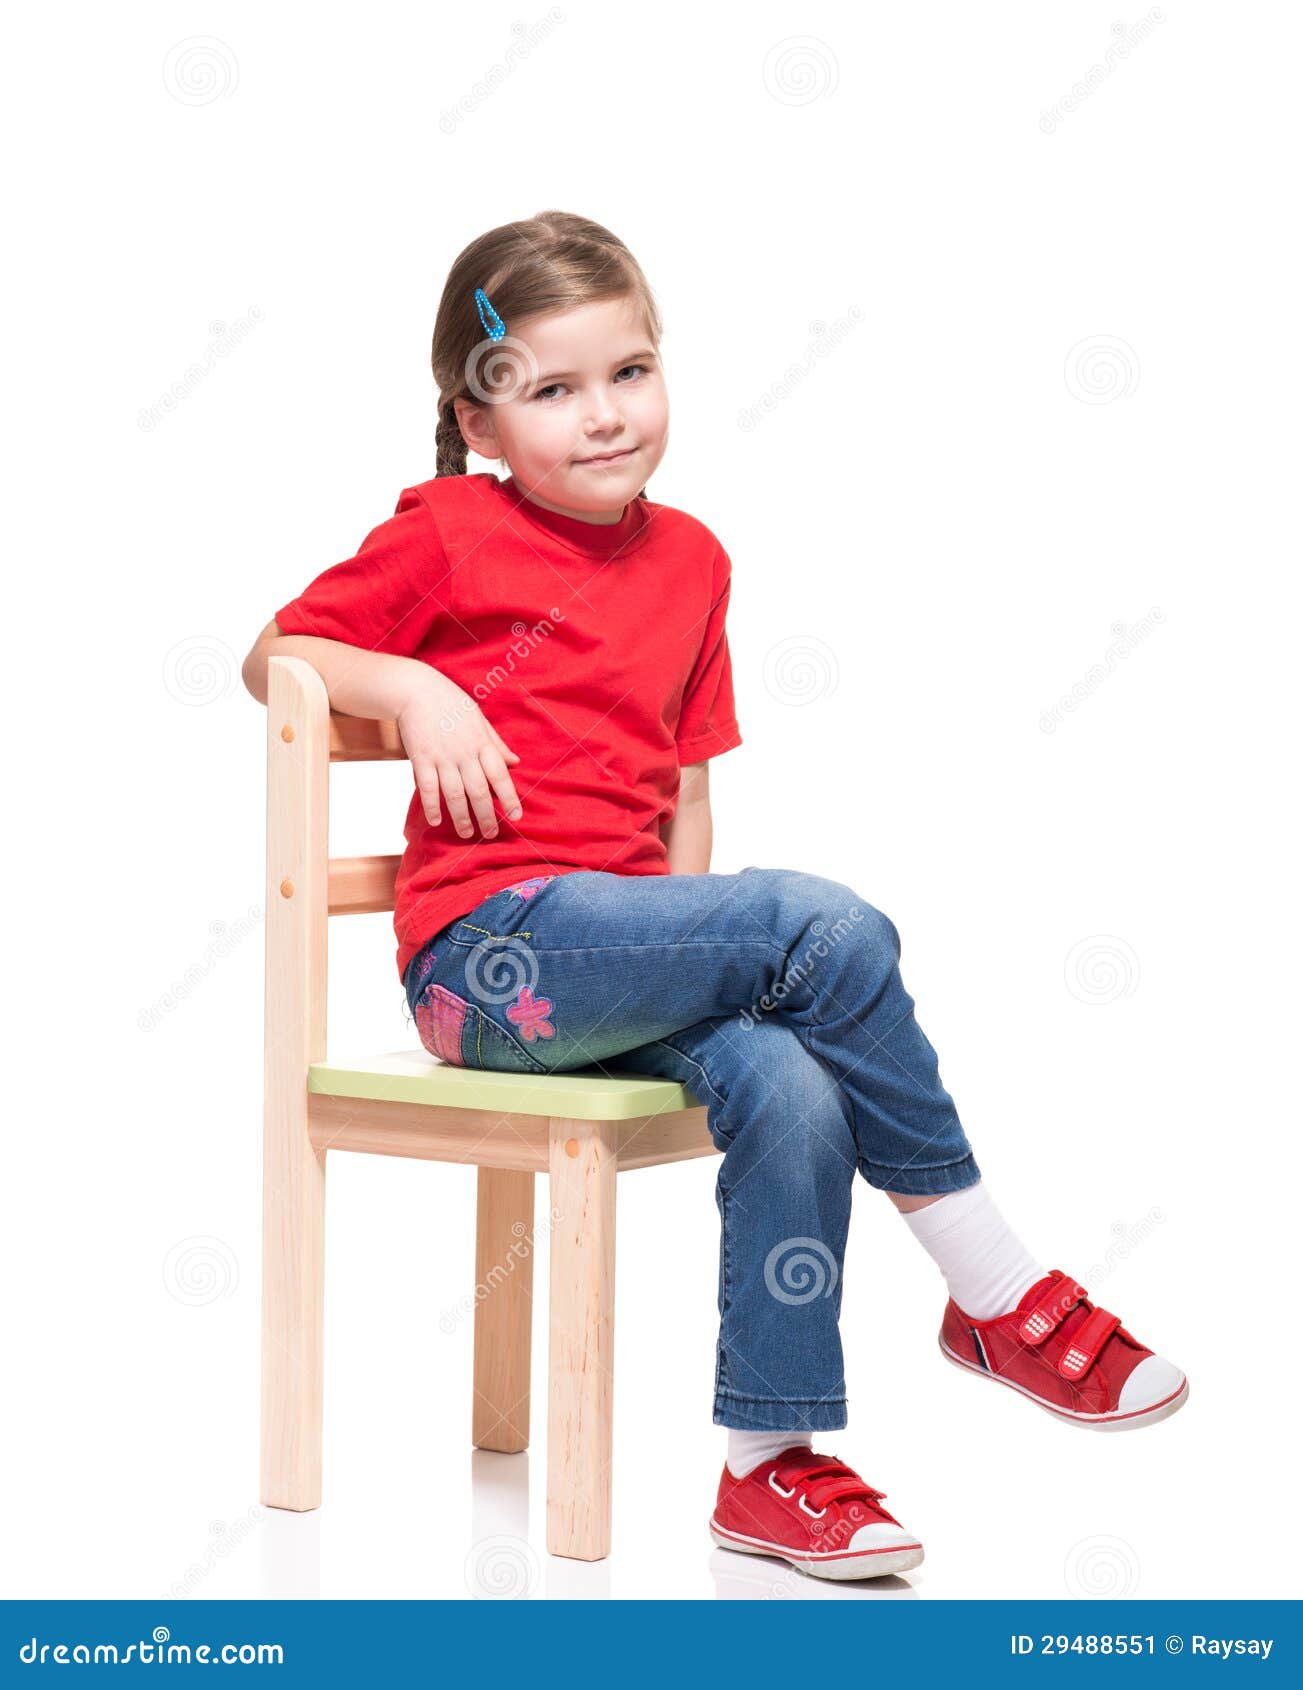 Little Girl Wearing Red T-short and Posing on Chair Stock Image - Image ...